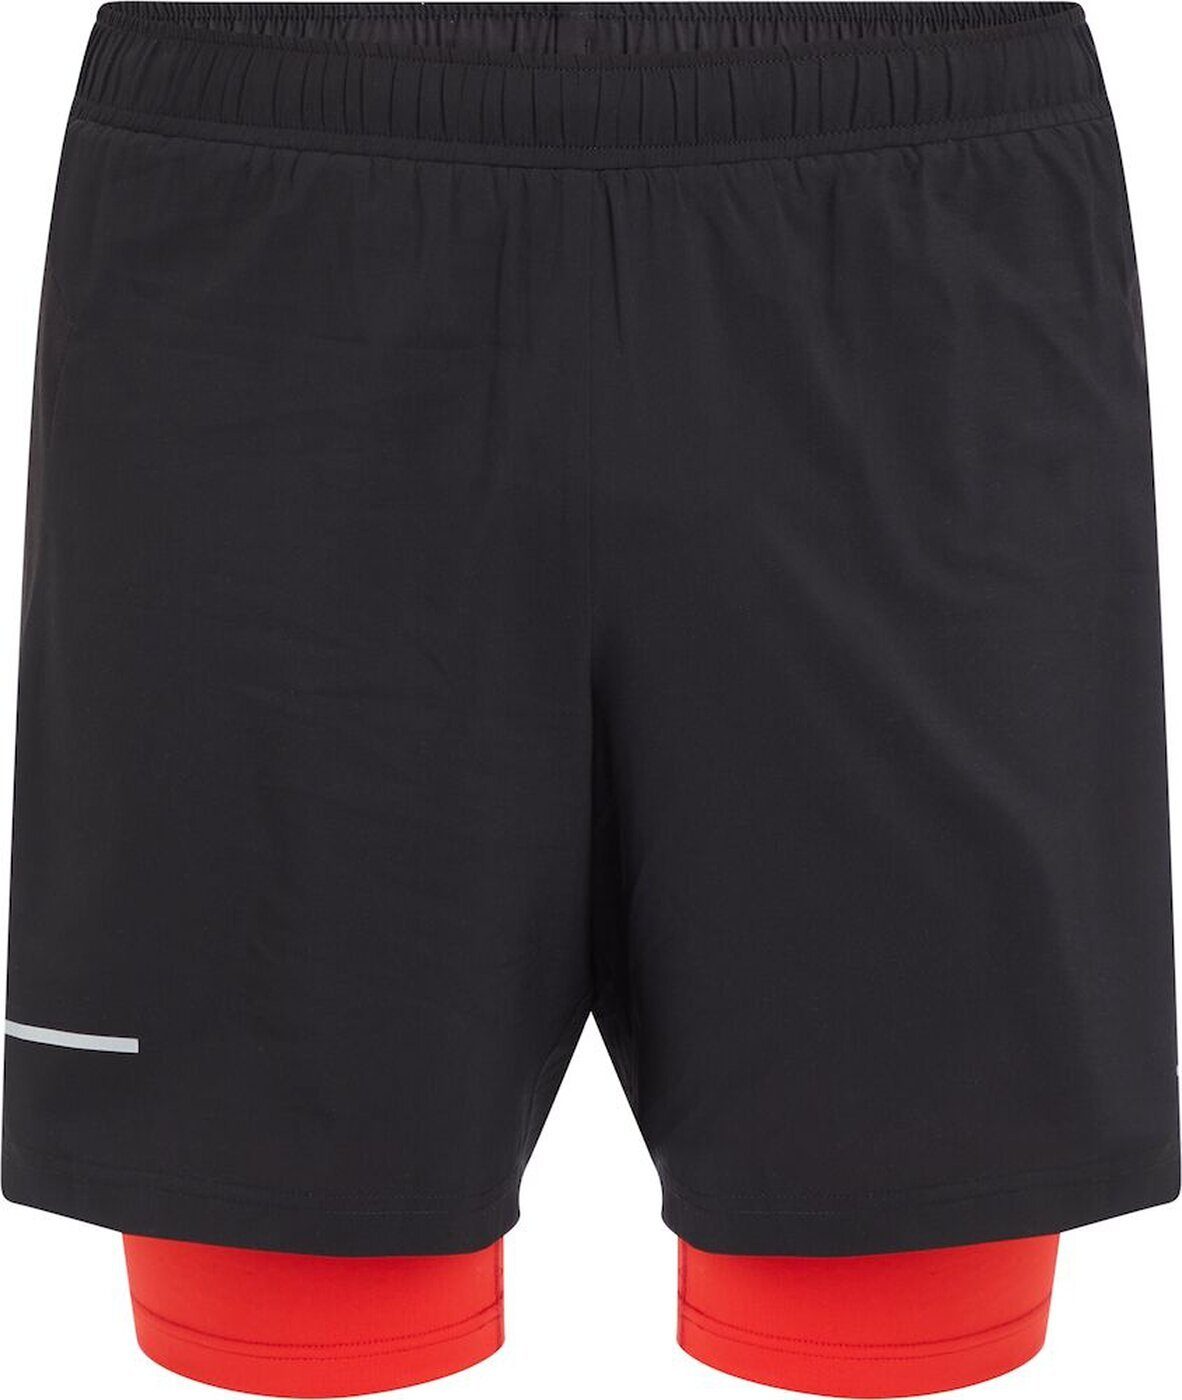 Energetics 2-in-1-Shorts He.-Shorts Allen BLACK/RED ux IV